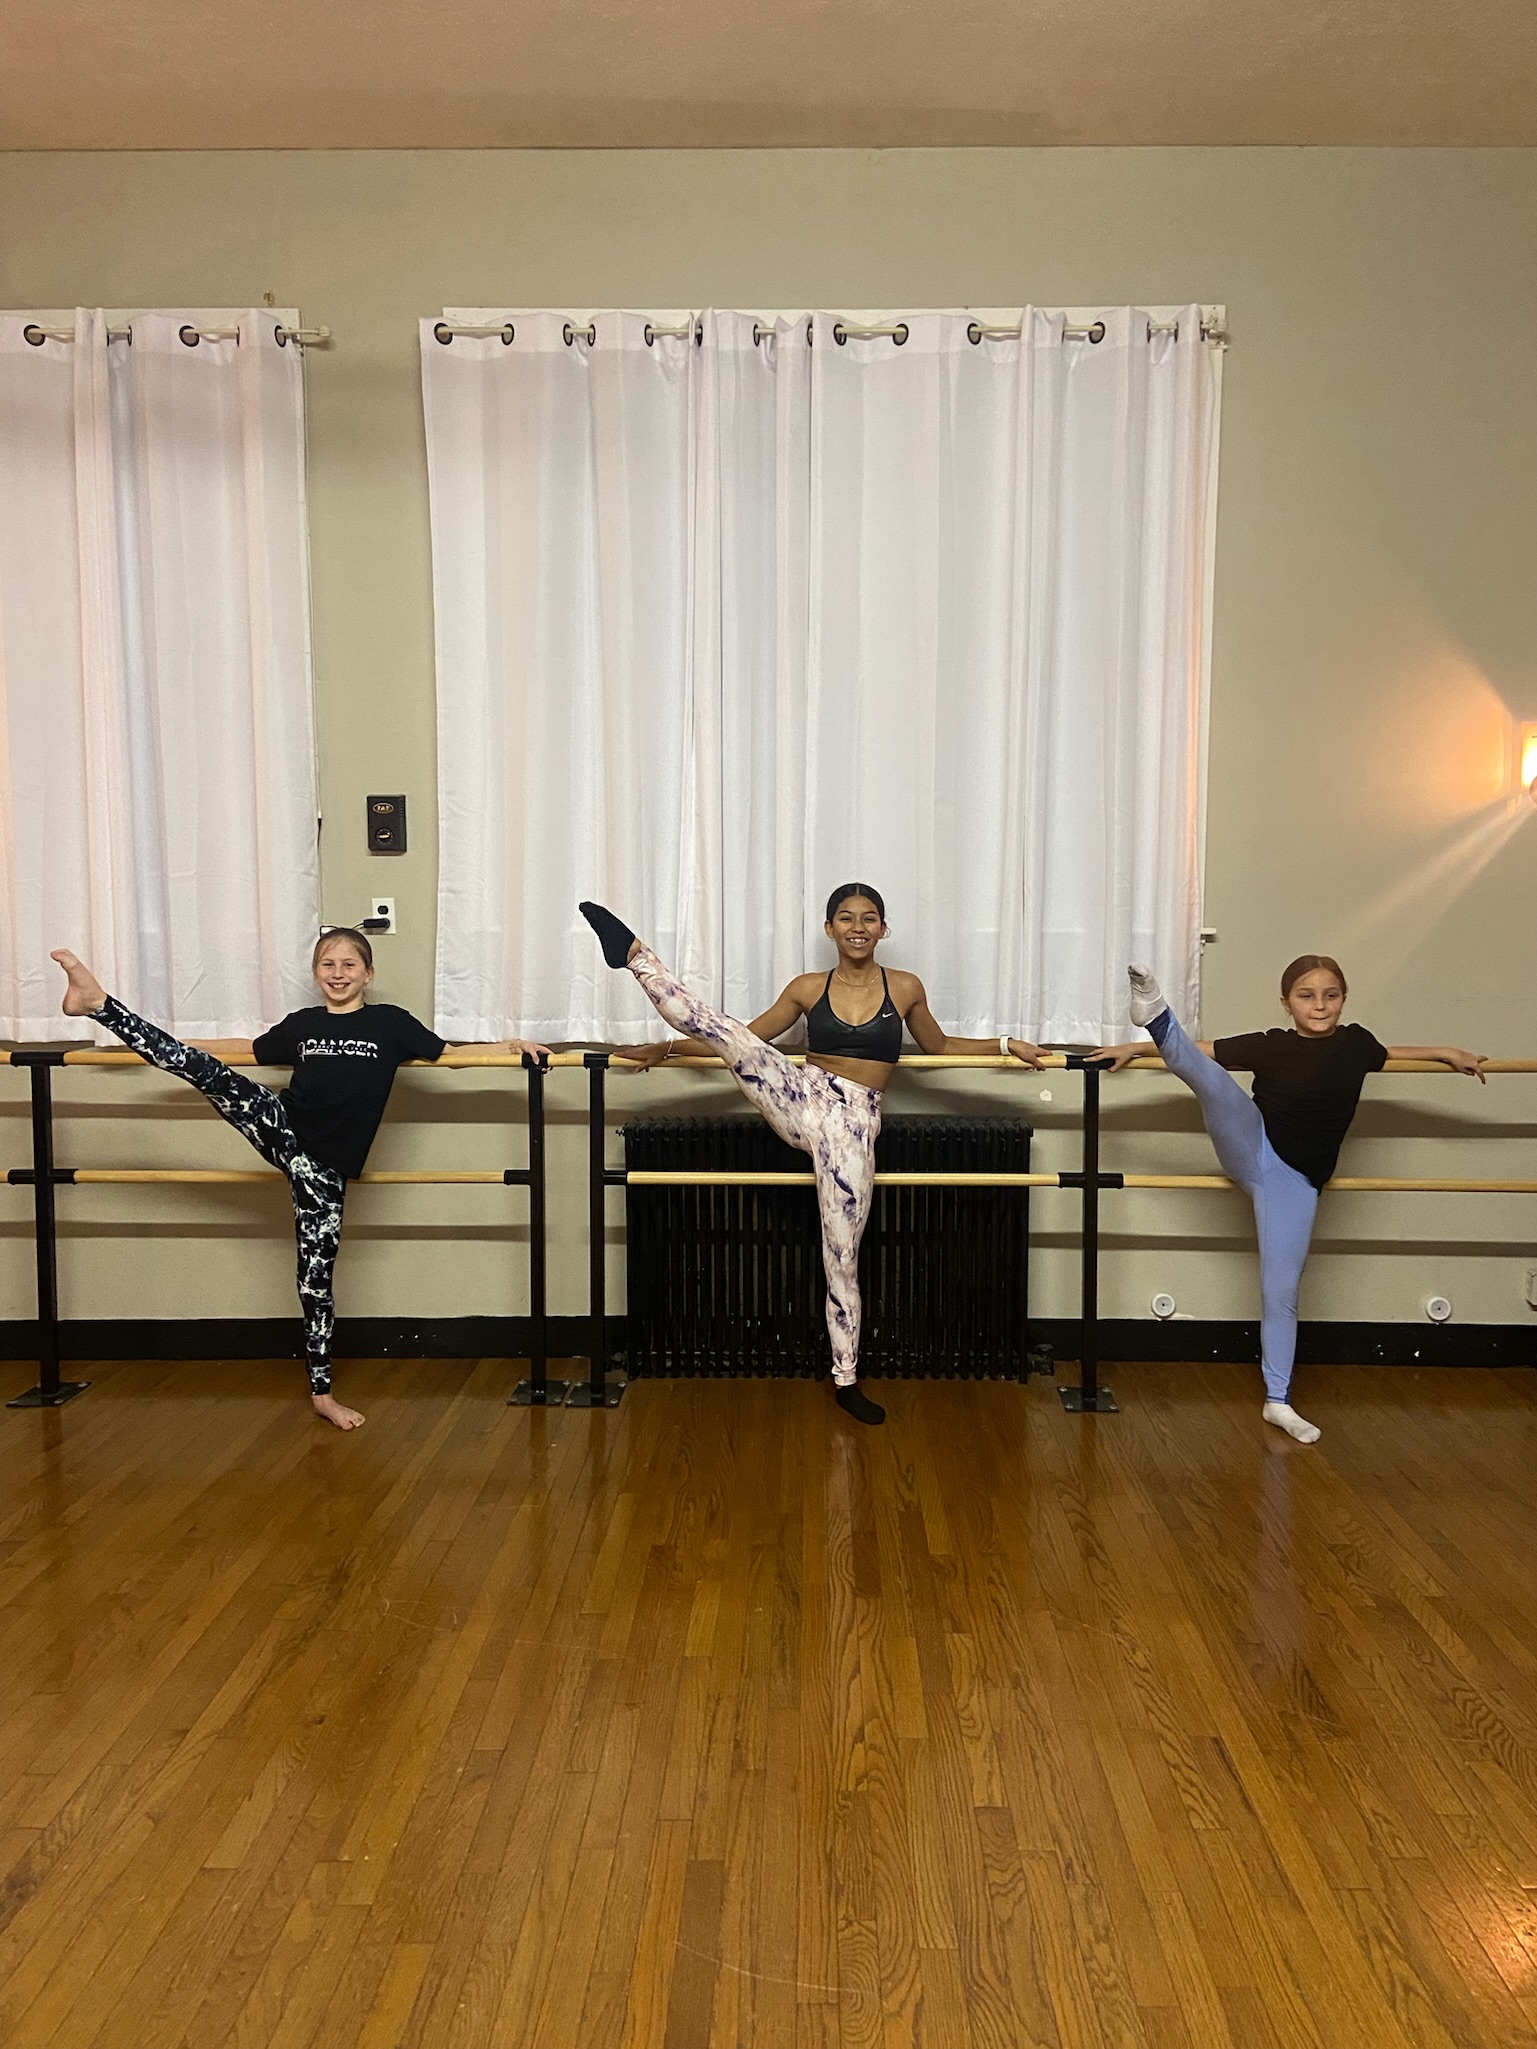 ballet classes for 3 year olds